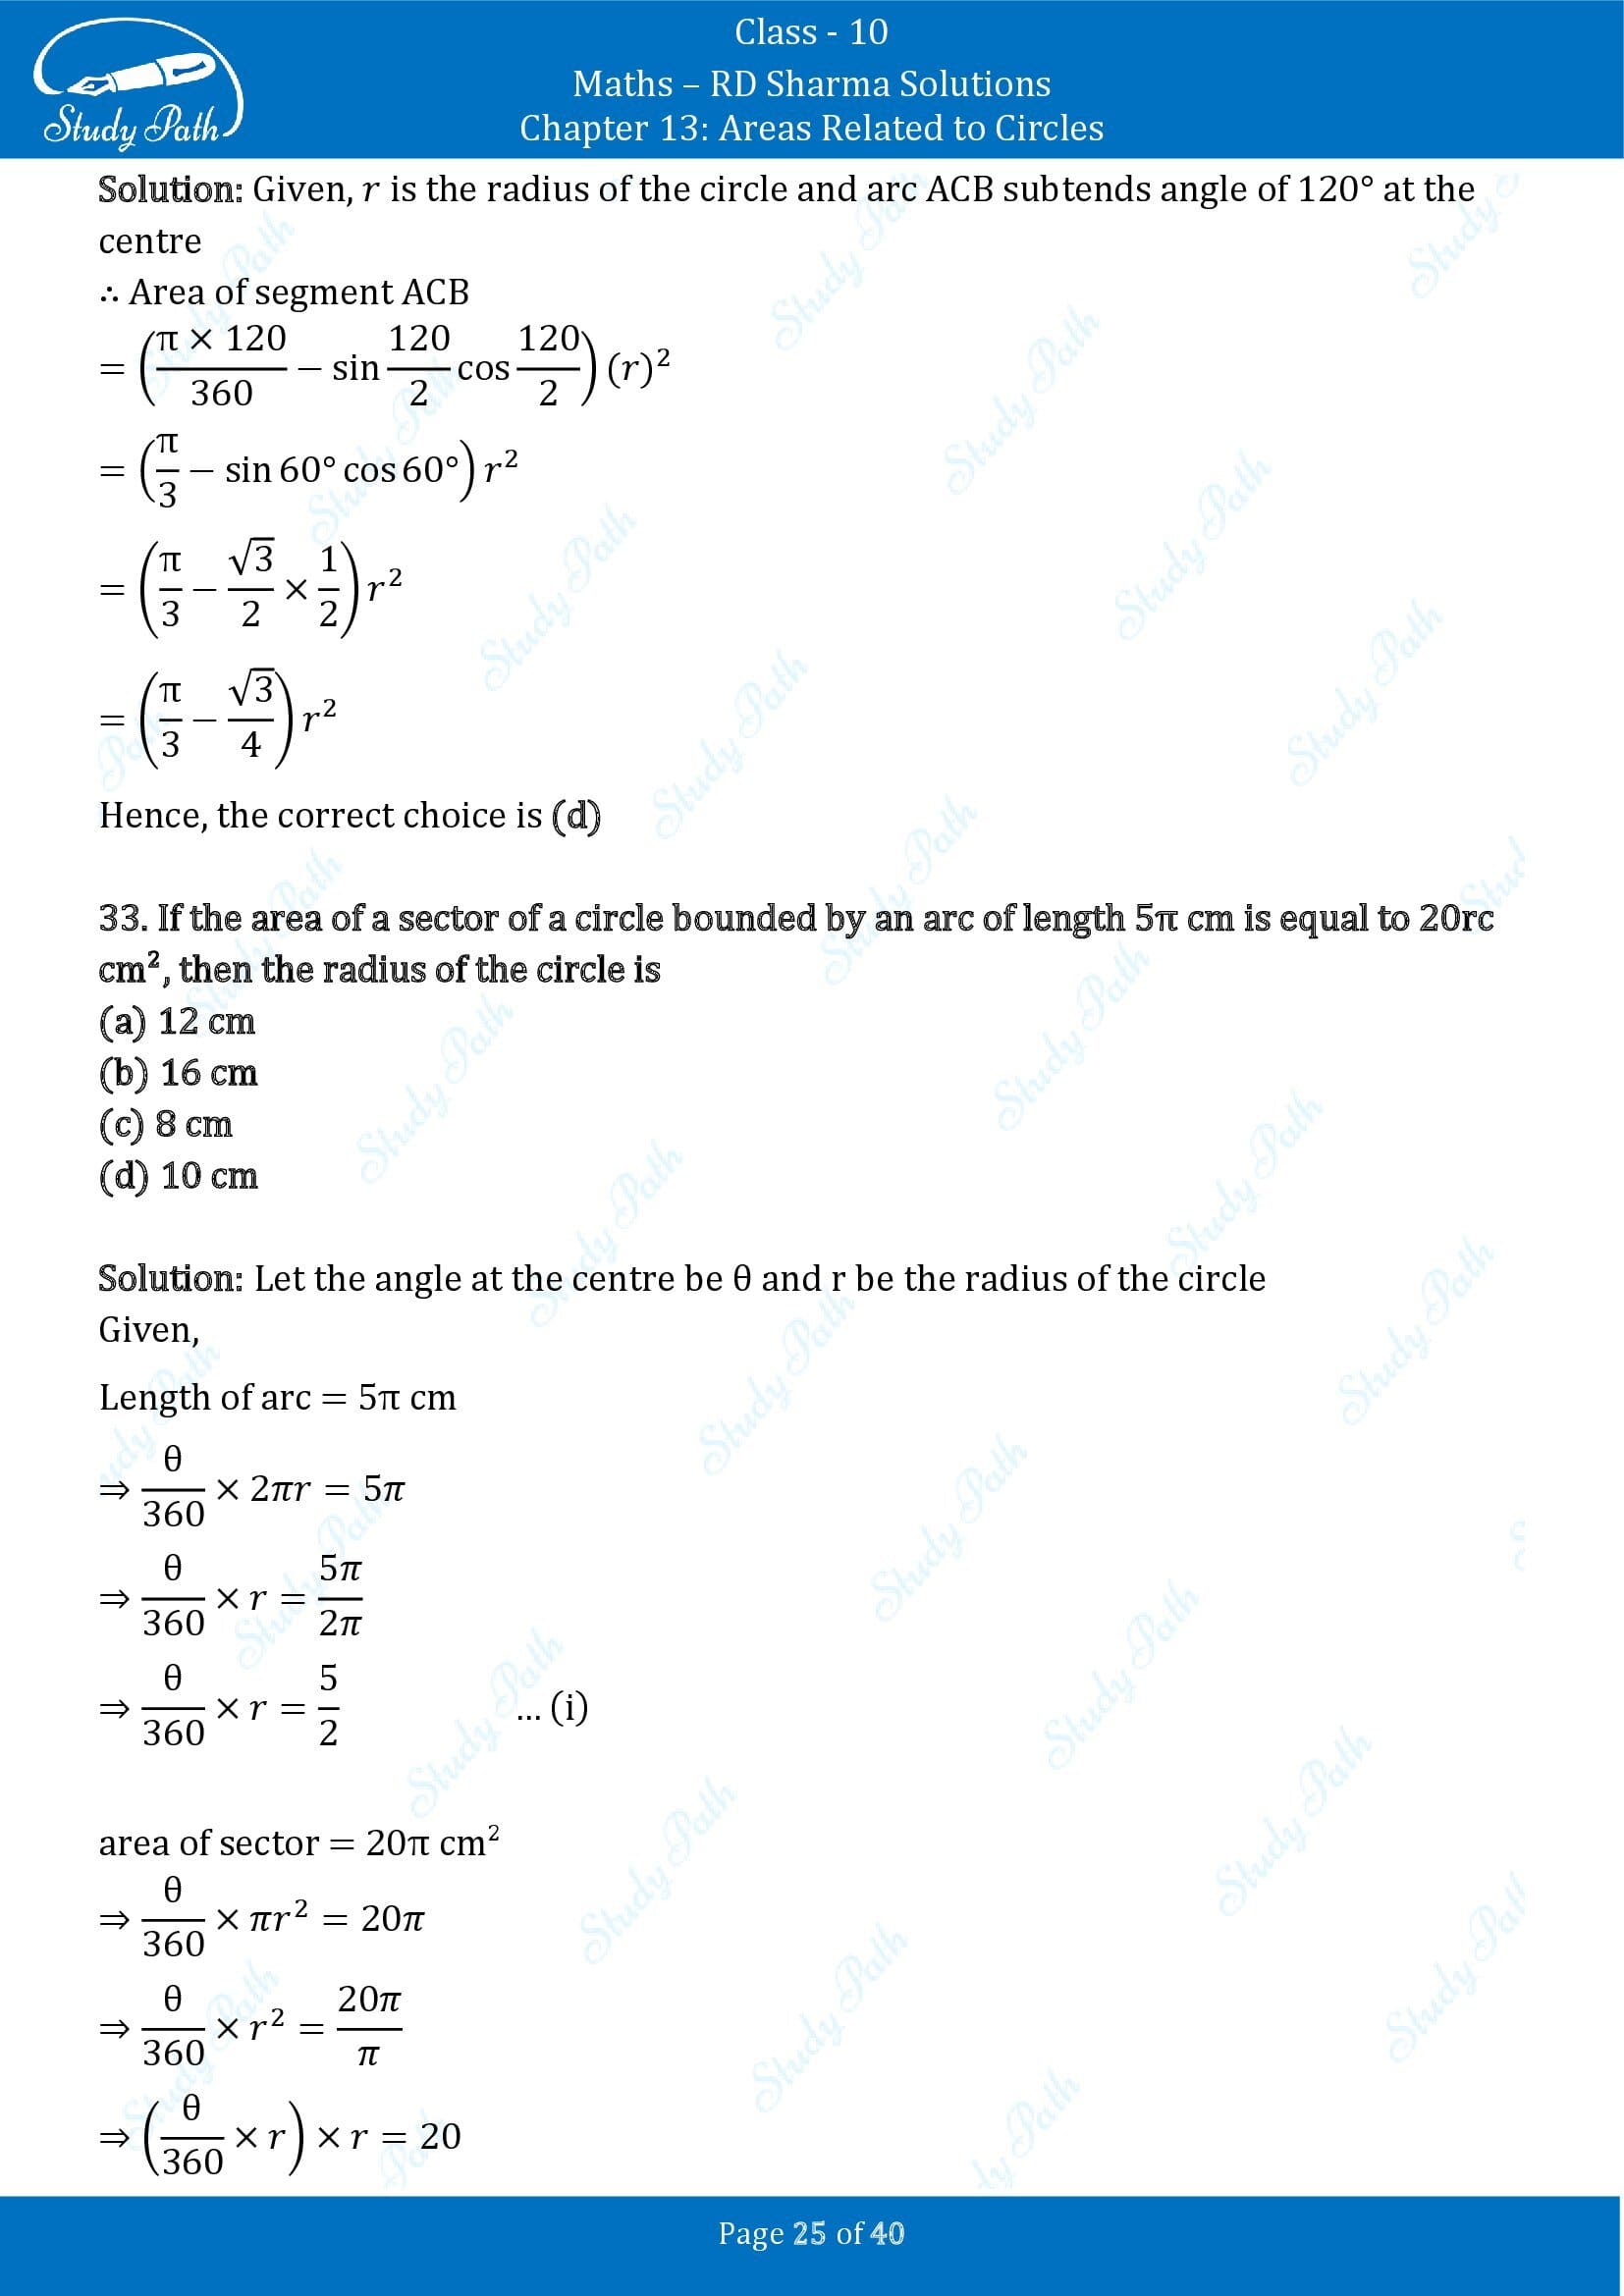 RD Sharma Solutions Class 10 Chapter 13 Areas Related to Circles Multiple Choice Question MCQs 00025